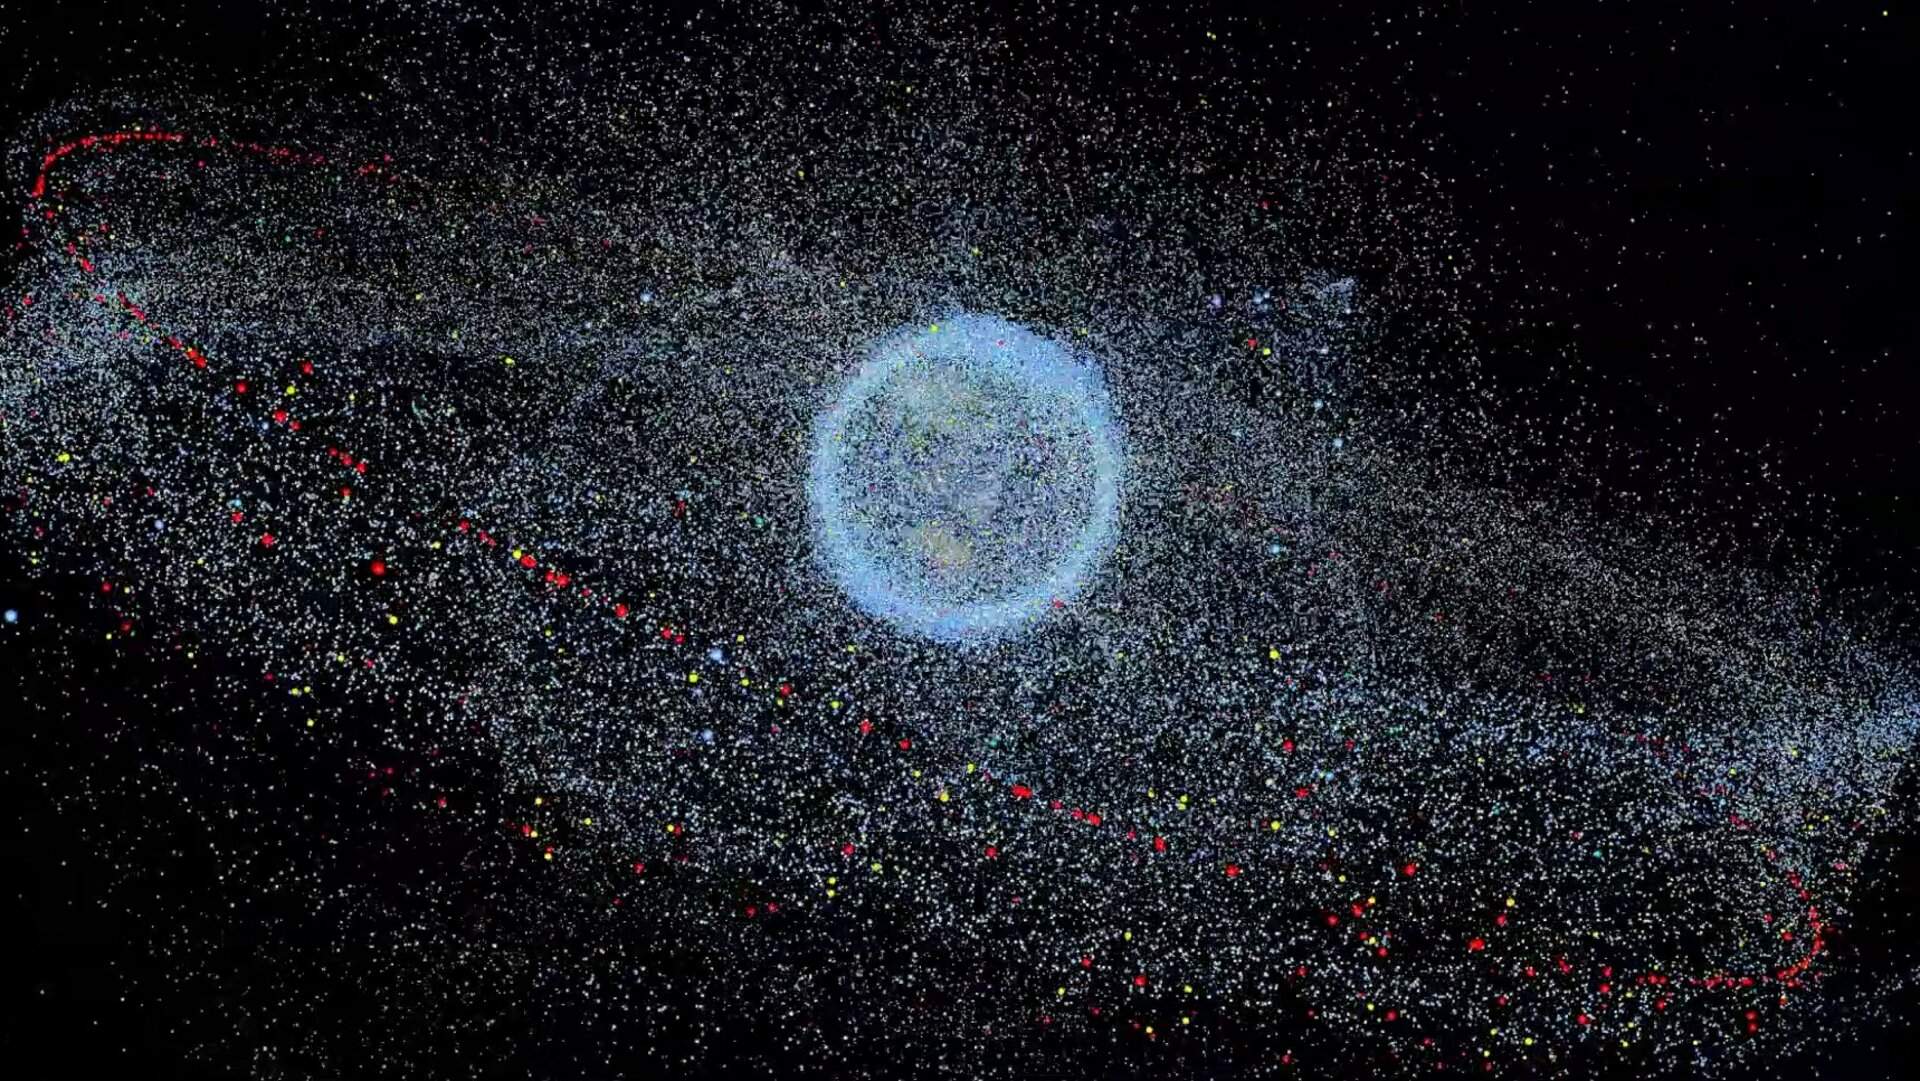 Governance and security EU proposes new space debris tracking initiative 2